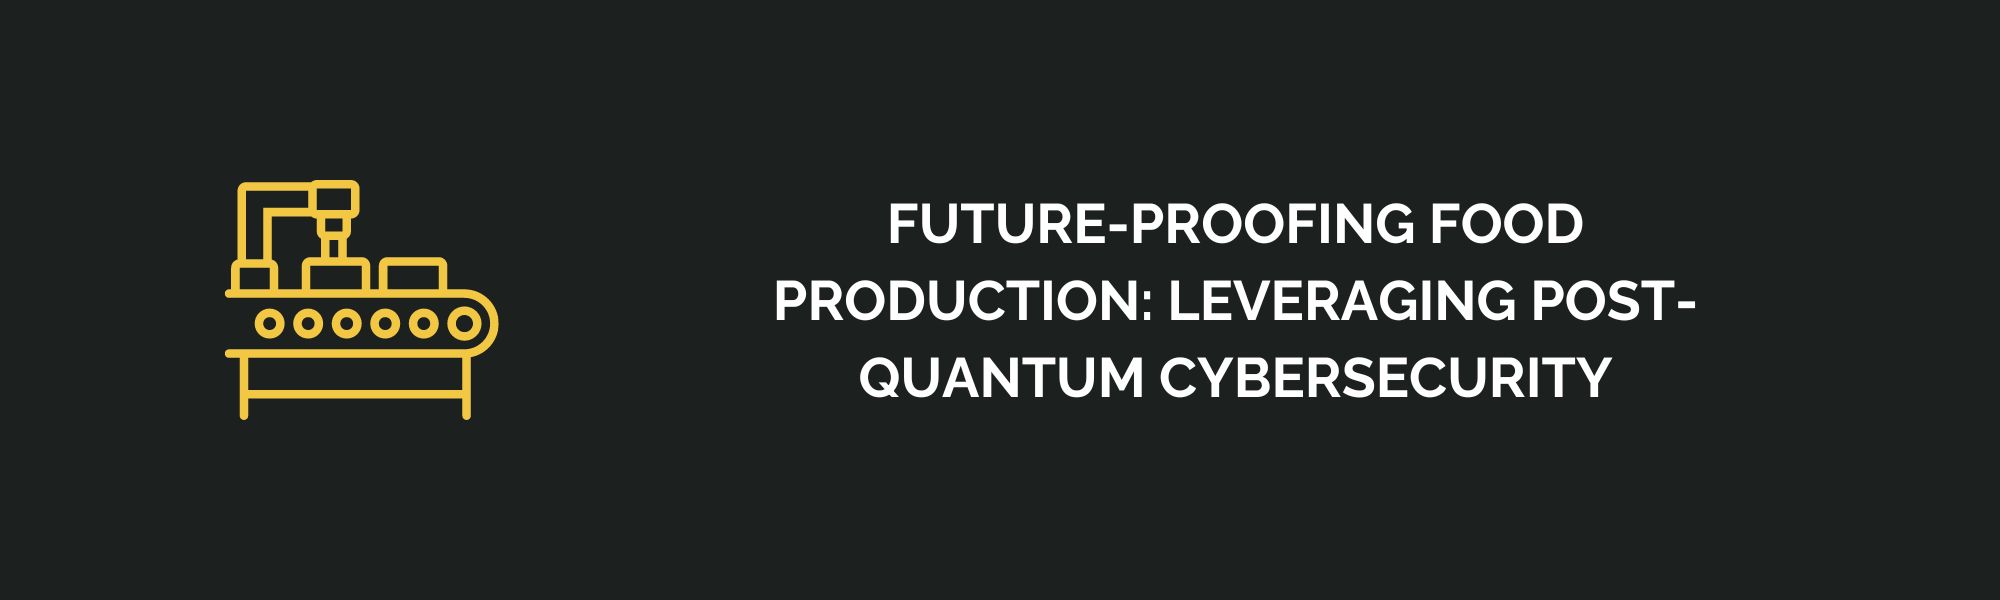 Future-Proofing Food Production: Leveraging Post-Quantum Cybersecurity